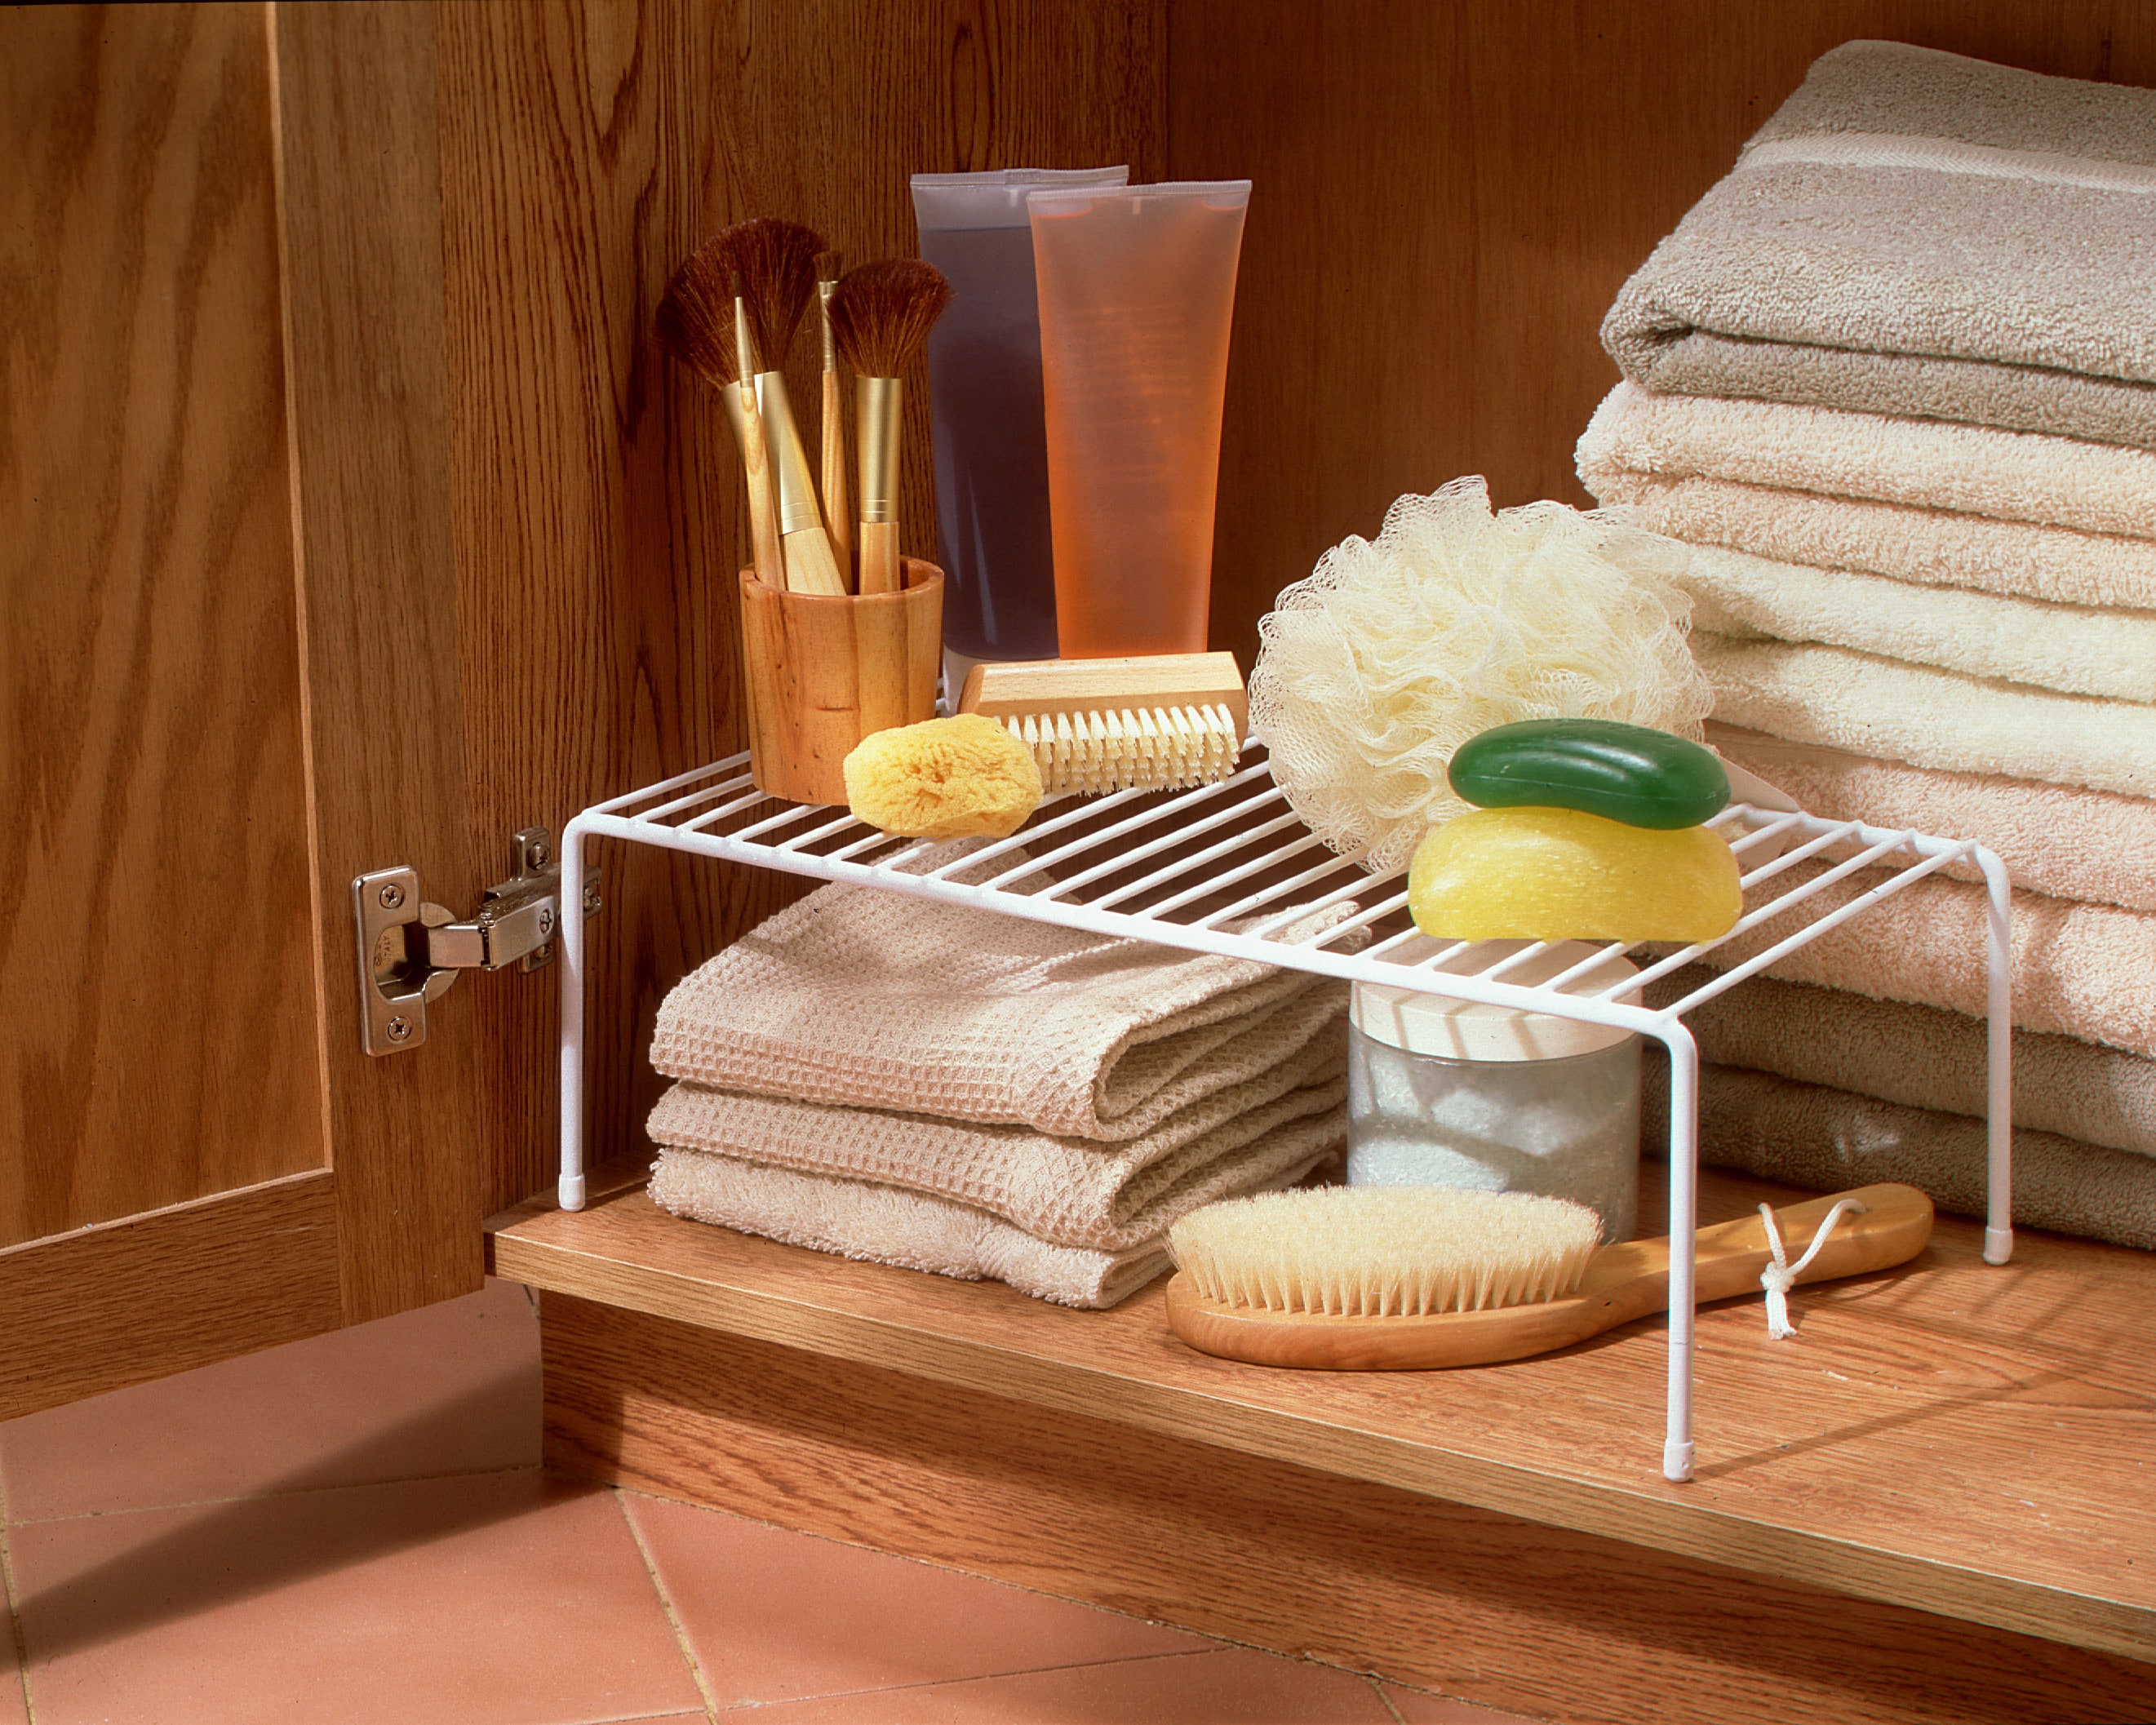 Cabinet Accessories - Ready to Assemble Solid Wood Plate Display Rack Kit  by Omega National at